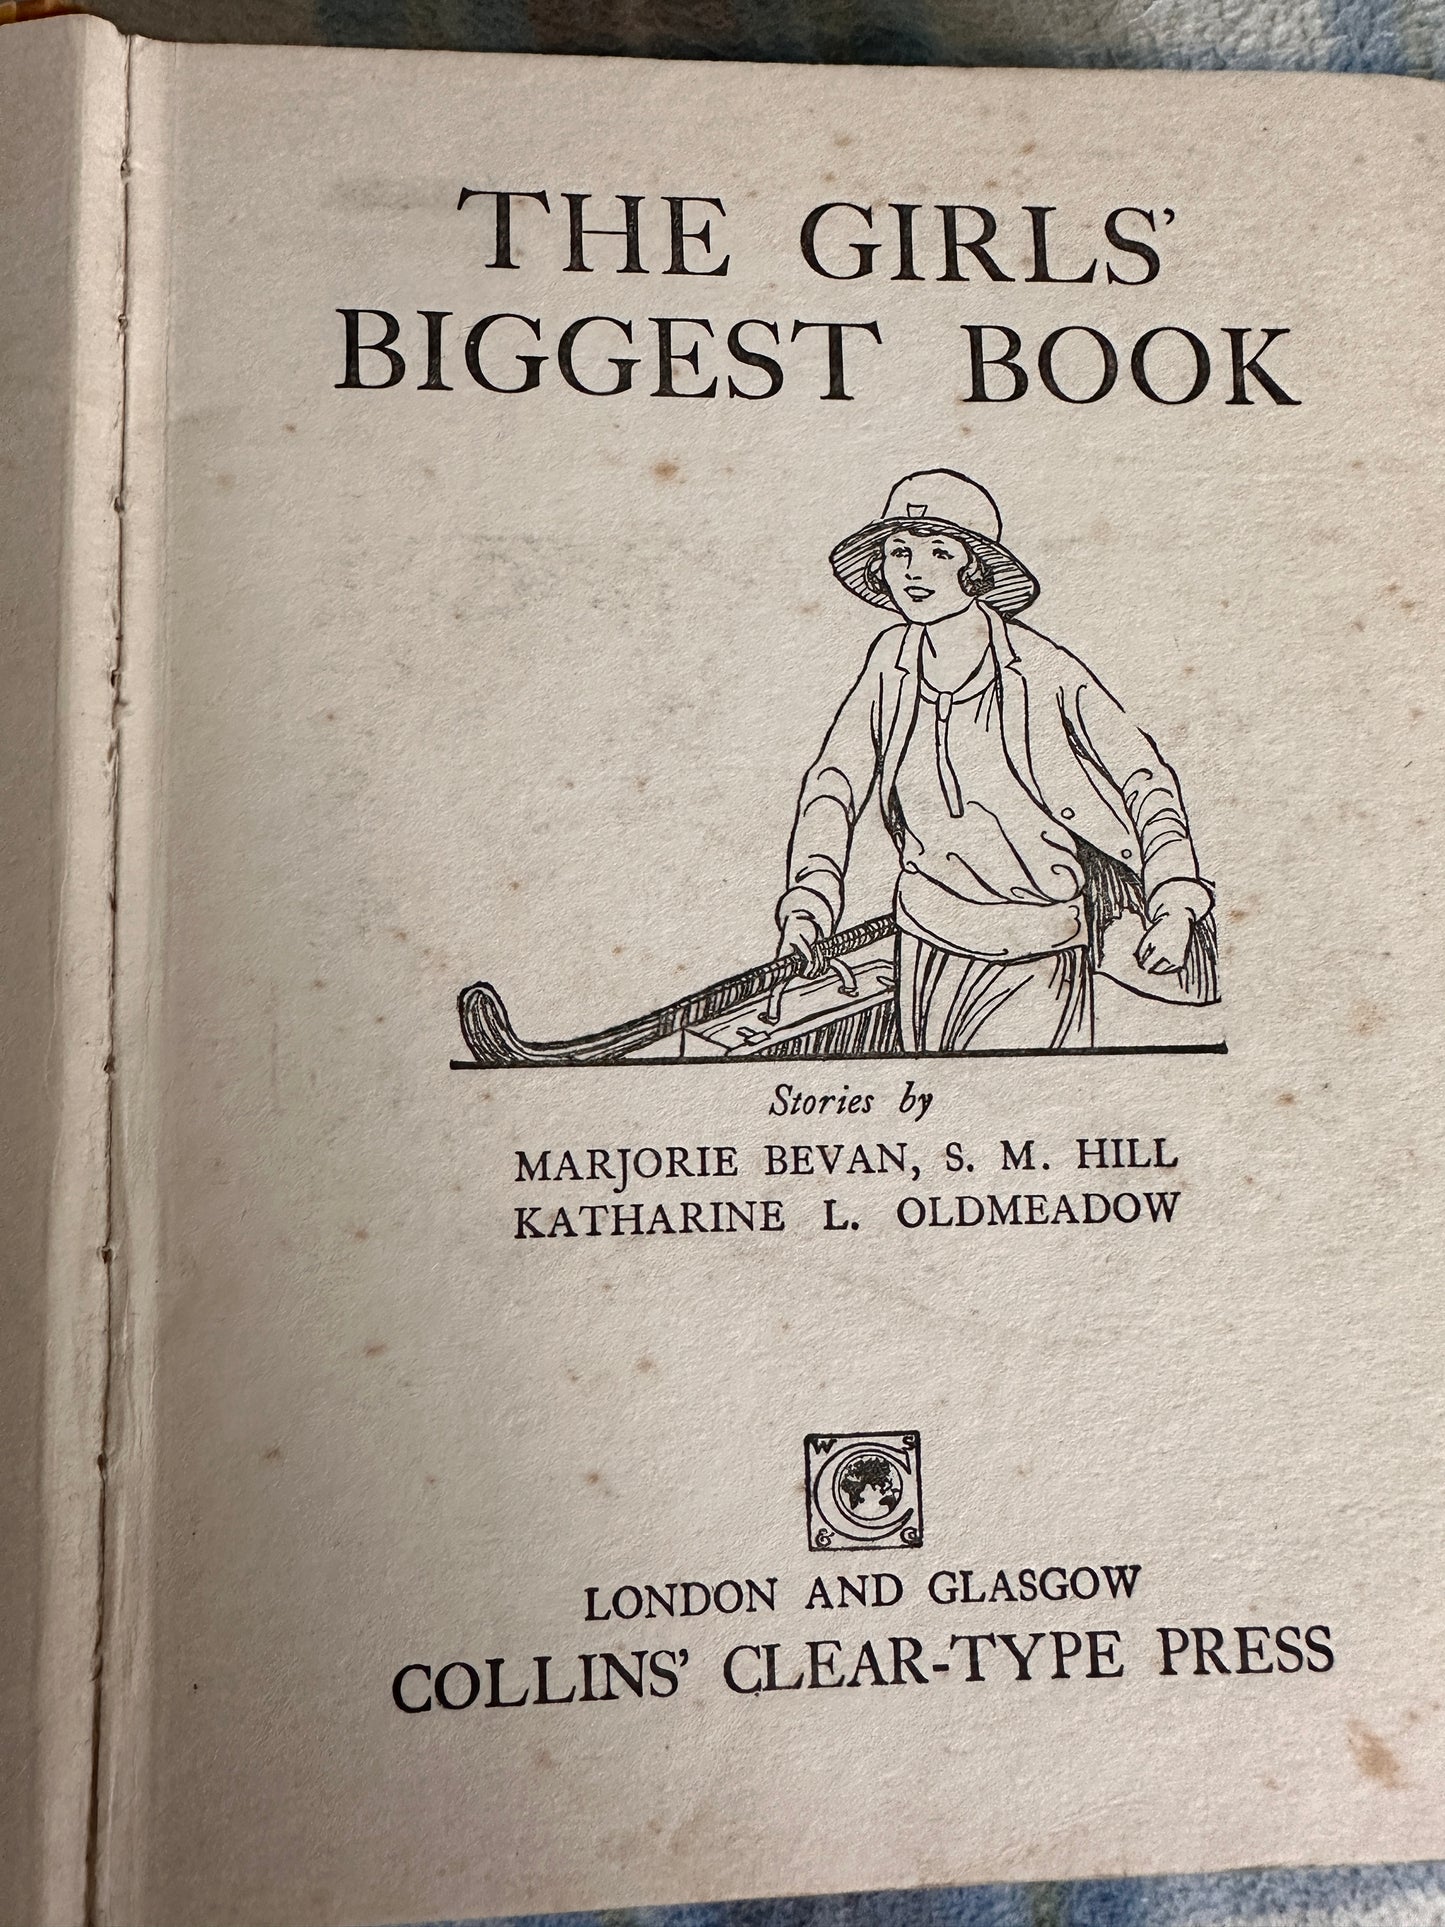 1930’s The Girls Biggest Book - Marjorie Bevan, S. M. Hill, Katherine L. Oldmeadow (Collins Clear-Type Press)